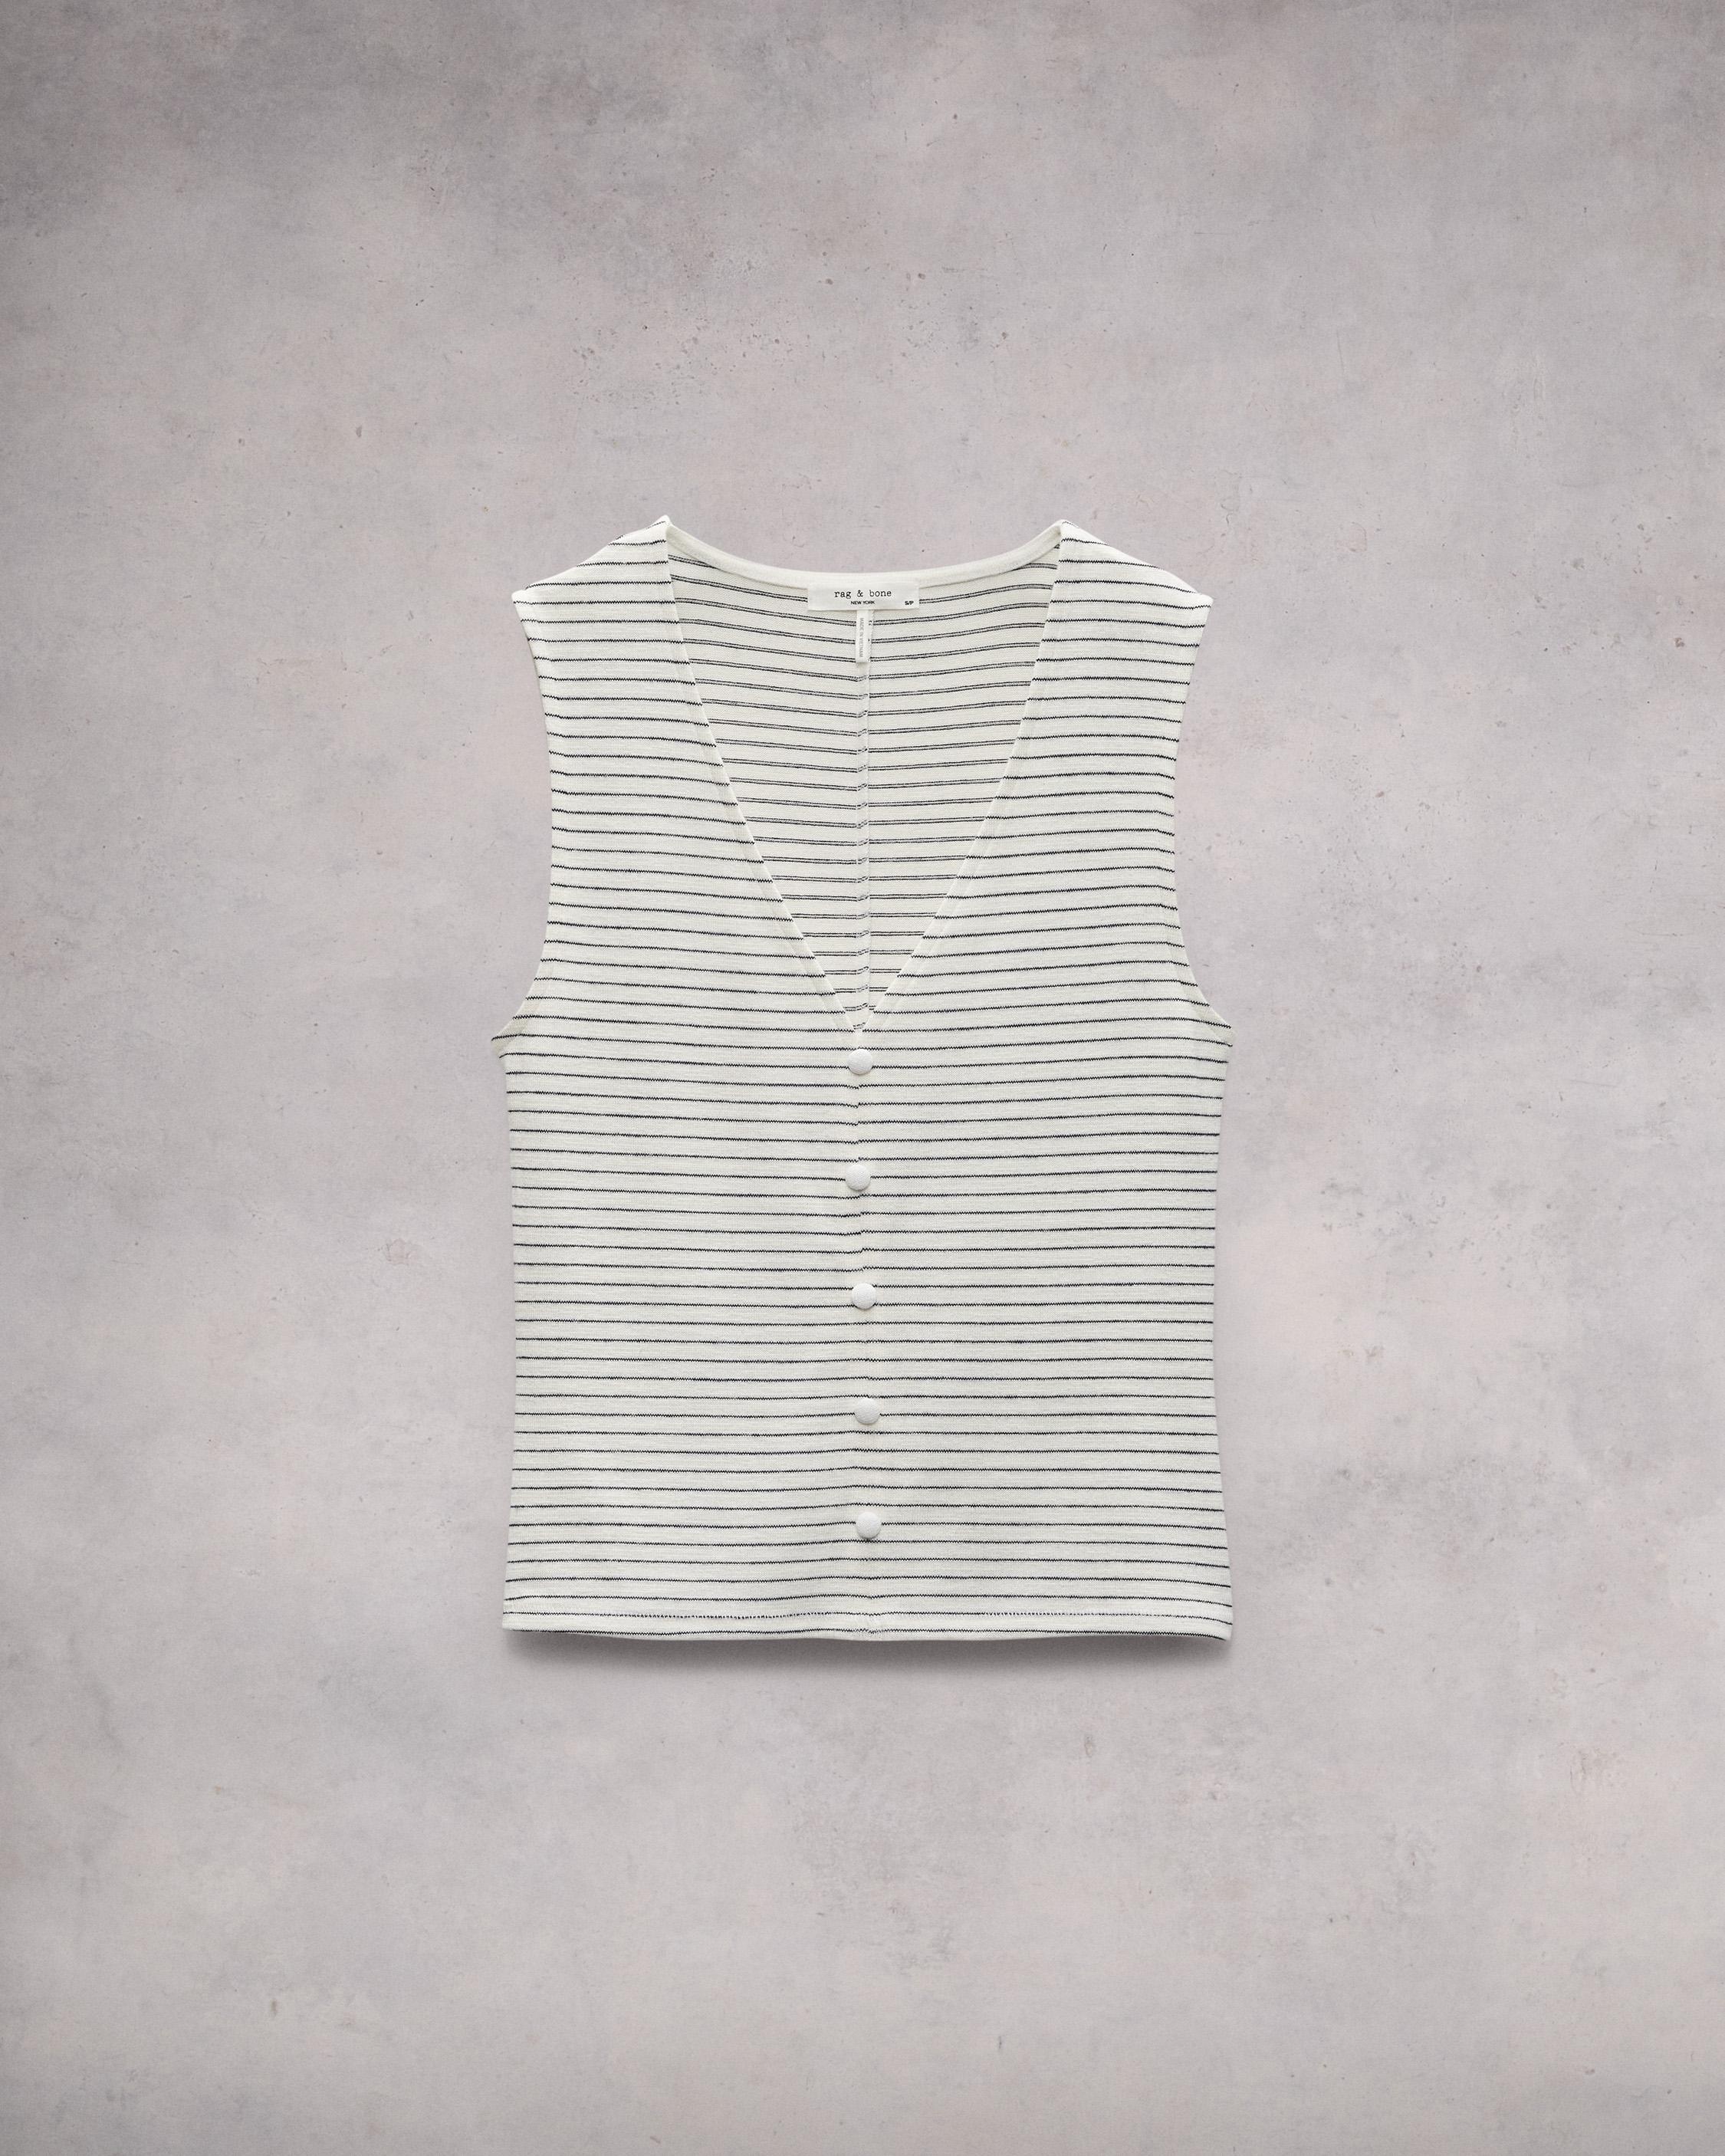 The Knit Striped Button-Up Tank